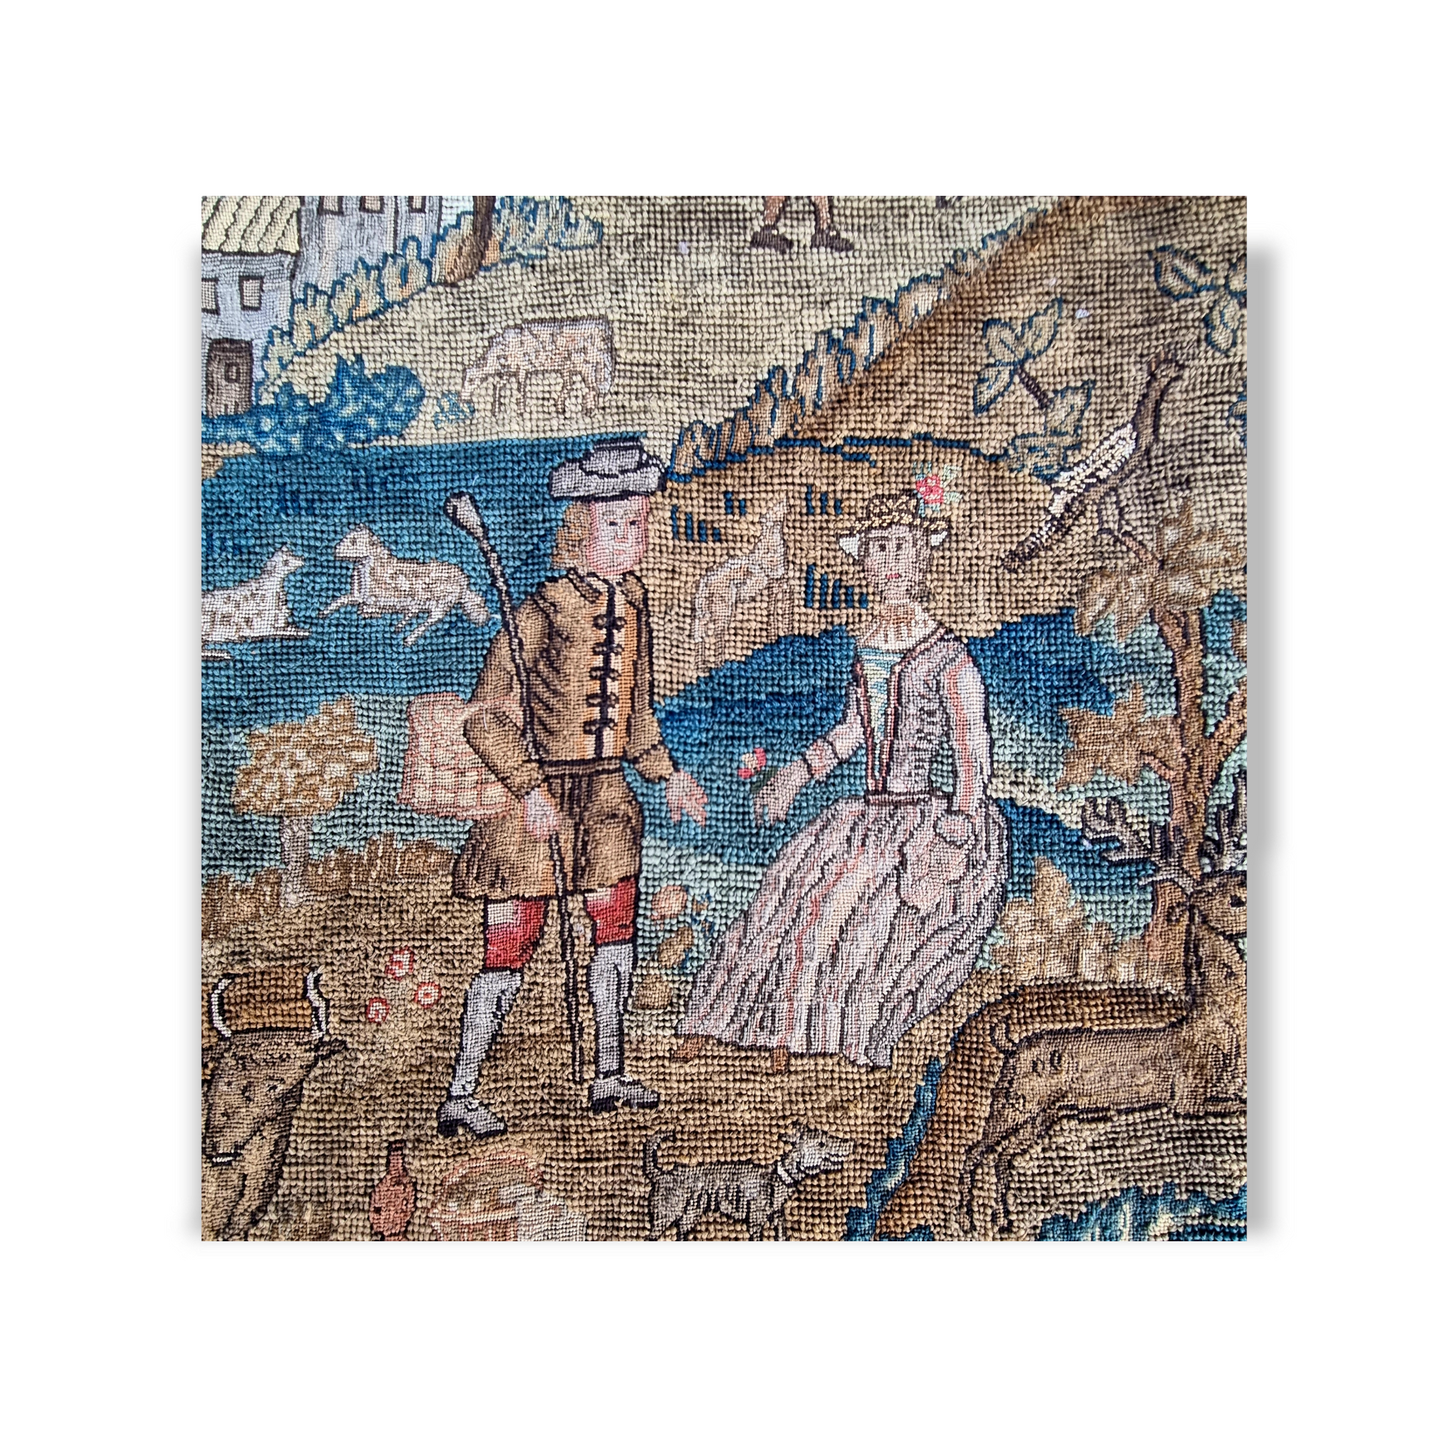 Rare Subject Matter - A Large 17th Century English Antique Needlework Depicting A Country Scene